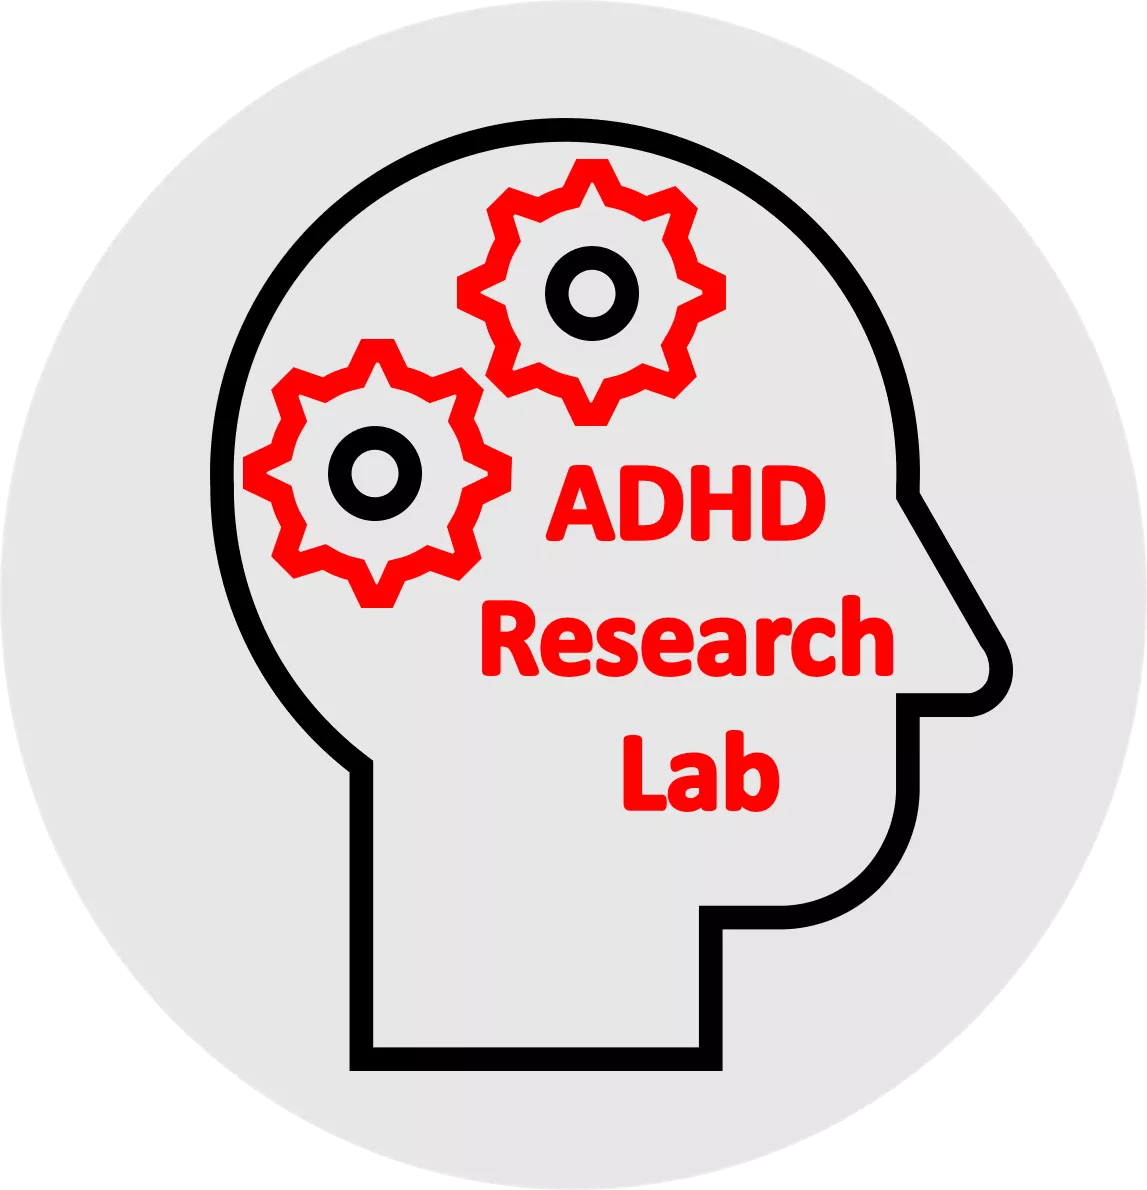 ADHD research lab picture